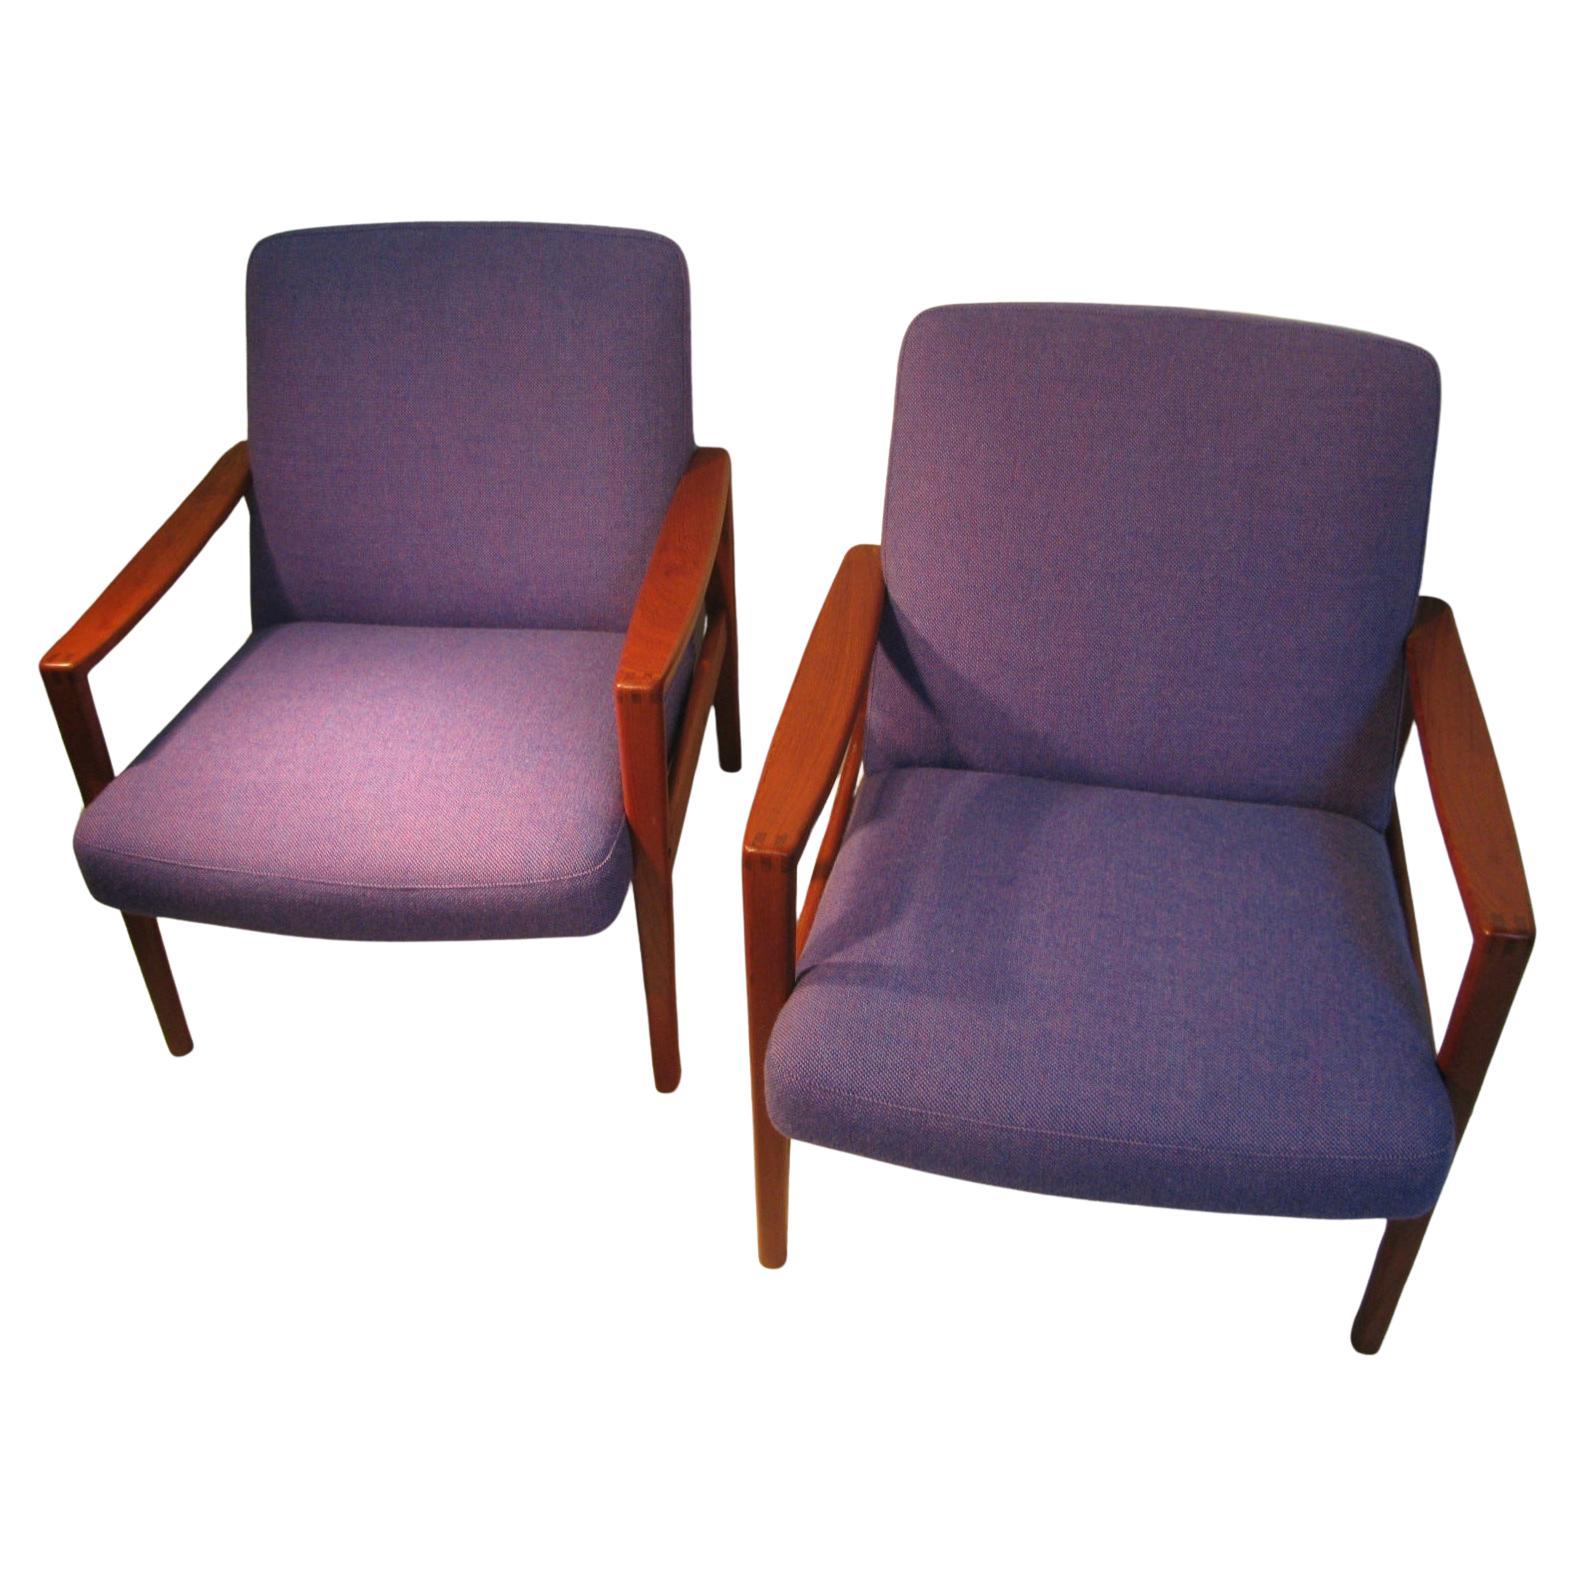 Mid-20th Century Pair of Mid Century Scandinavian Modern Lounge Chairs Ulferts Sweden For Sale